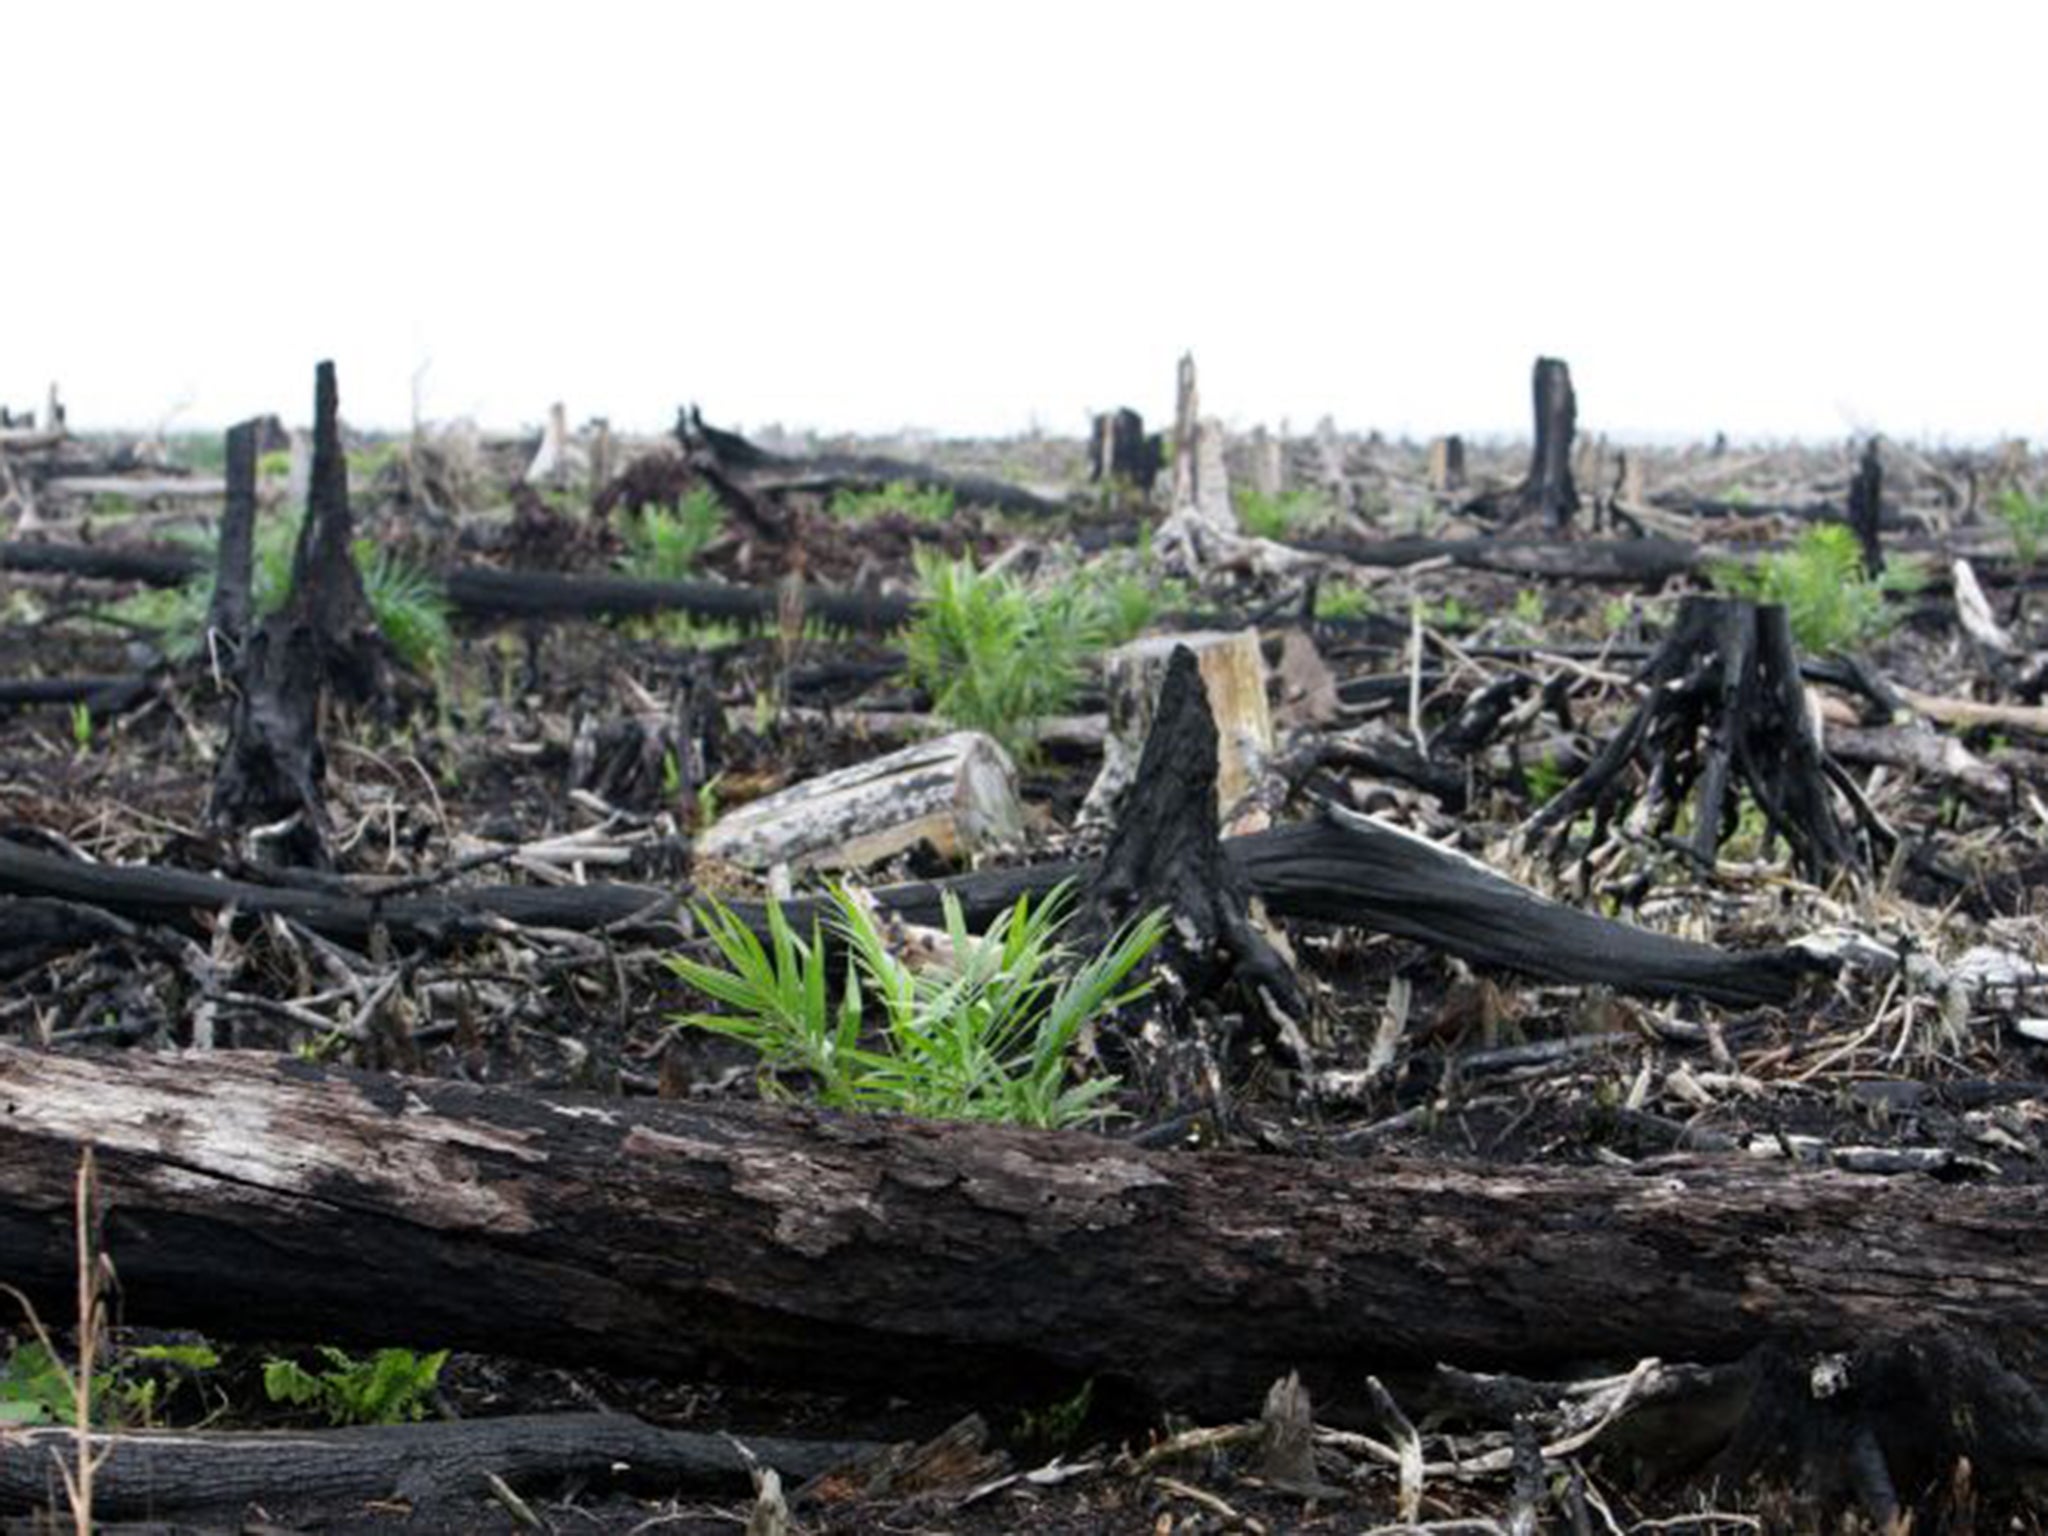 The researchers claim that draining peatland to make way for palm oil plantations produces annual carbon emissions equivalent to those emitted by 830,000 cars